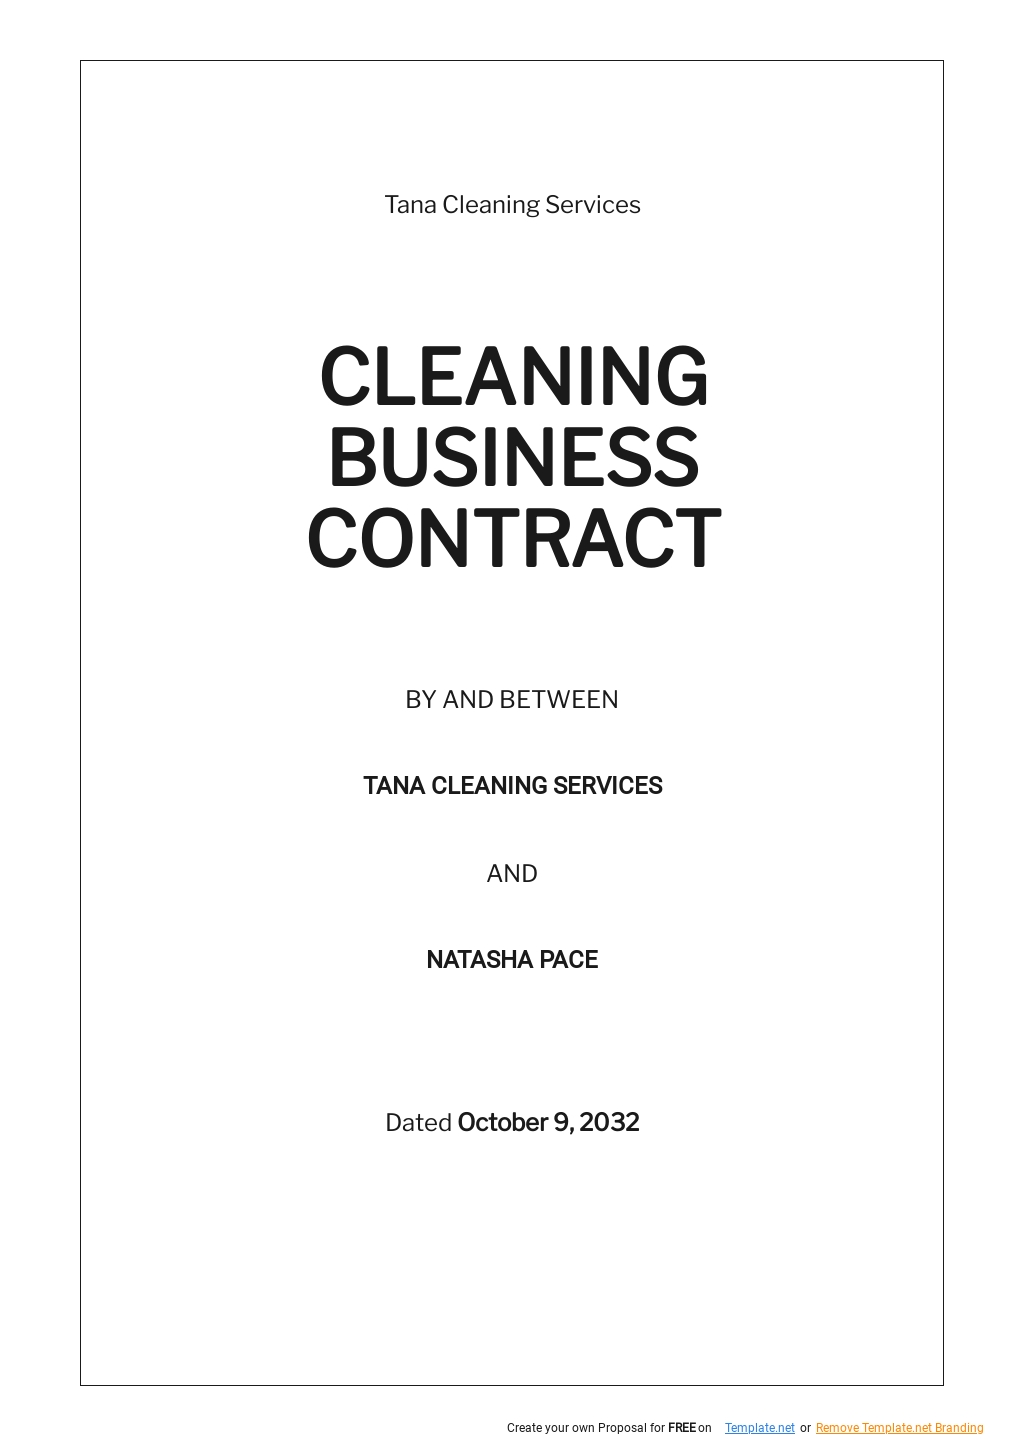 Cleaning Business Contract Template.jpe